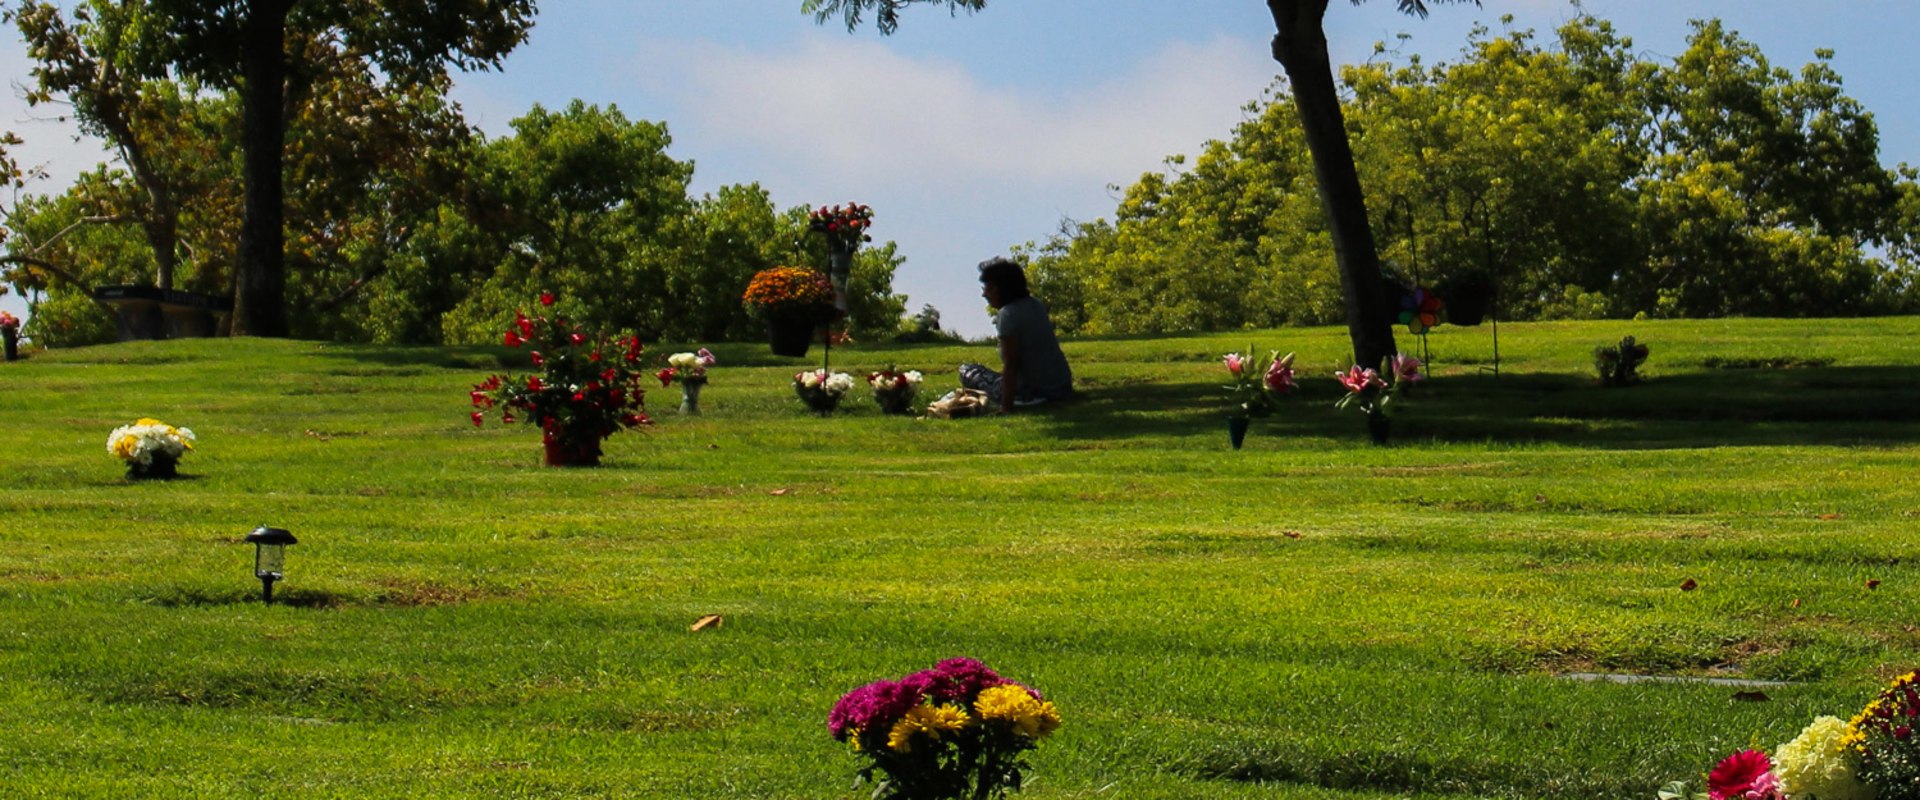 Honoring Our Loved Ones: The Policy on Flowers and Decorations at Memorial Parks in Los Angeles County, CA